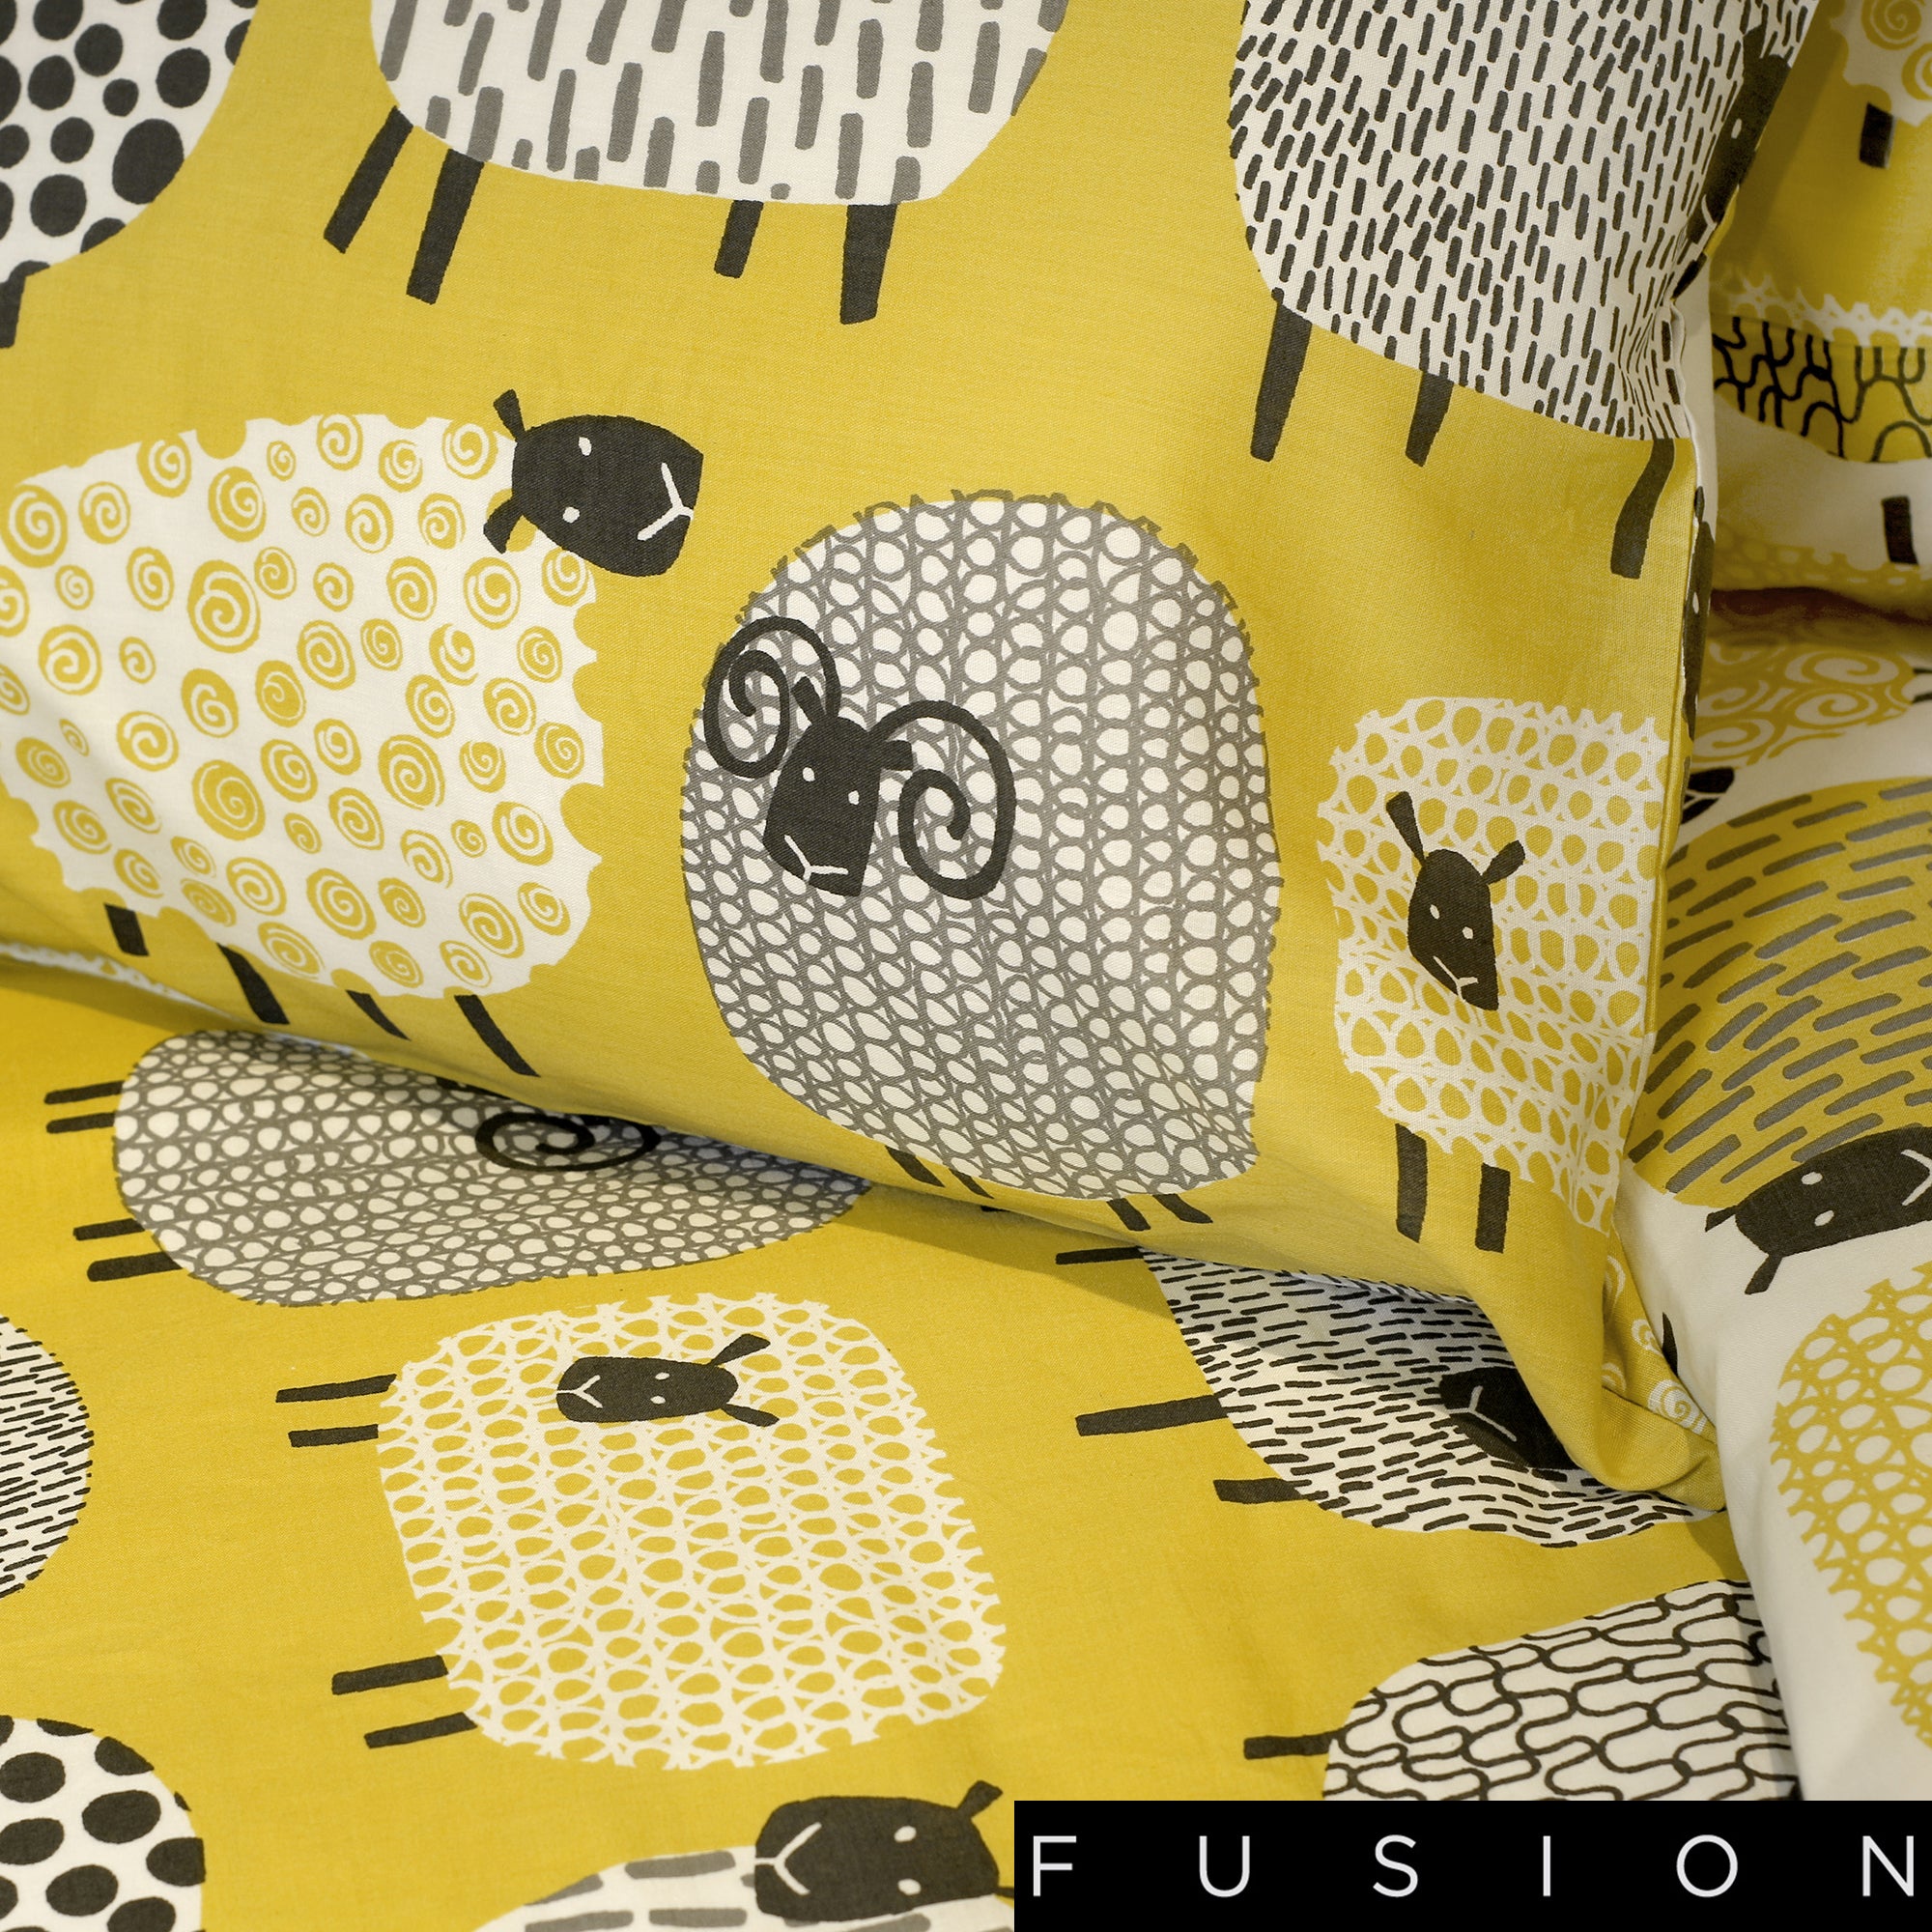 Dotty Sheep Ochre - Easy Care Duvet Cover Set - By Fusion